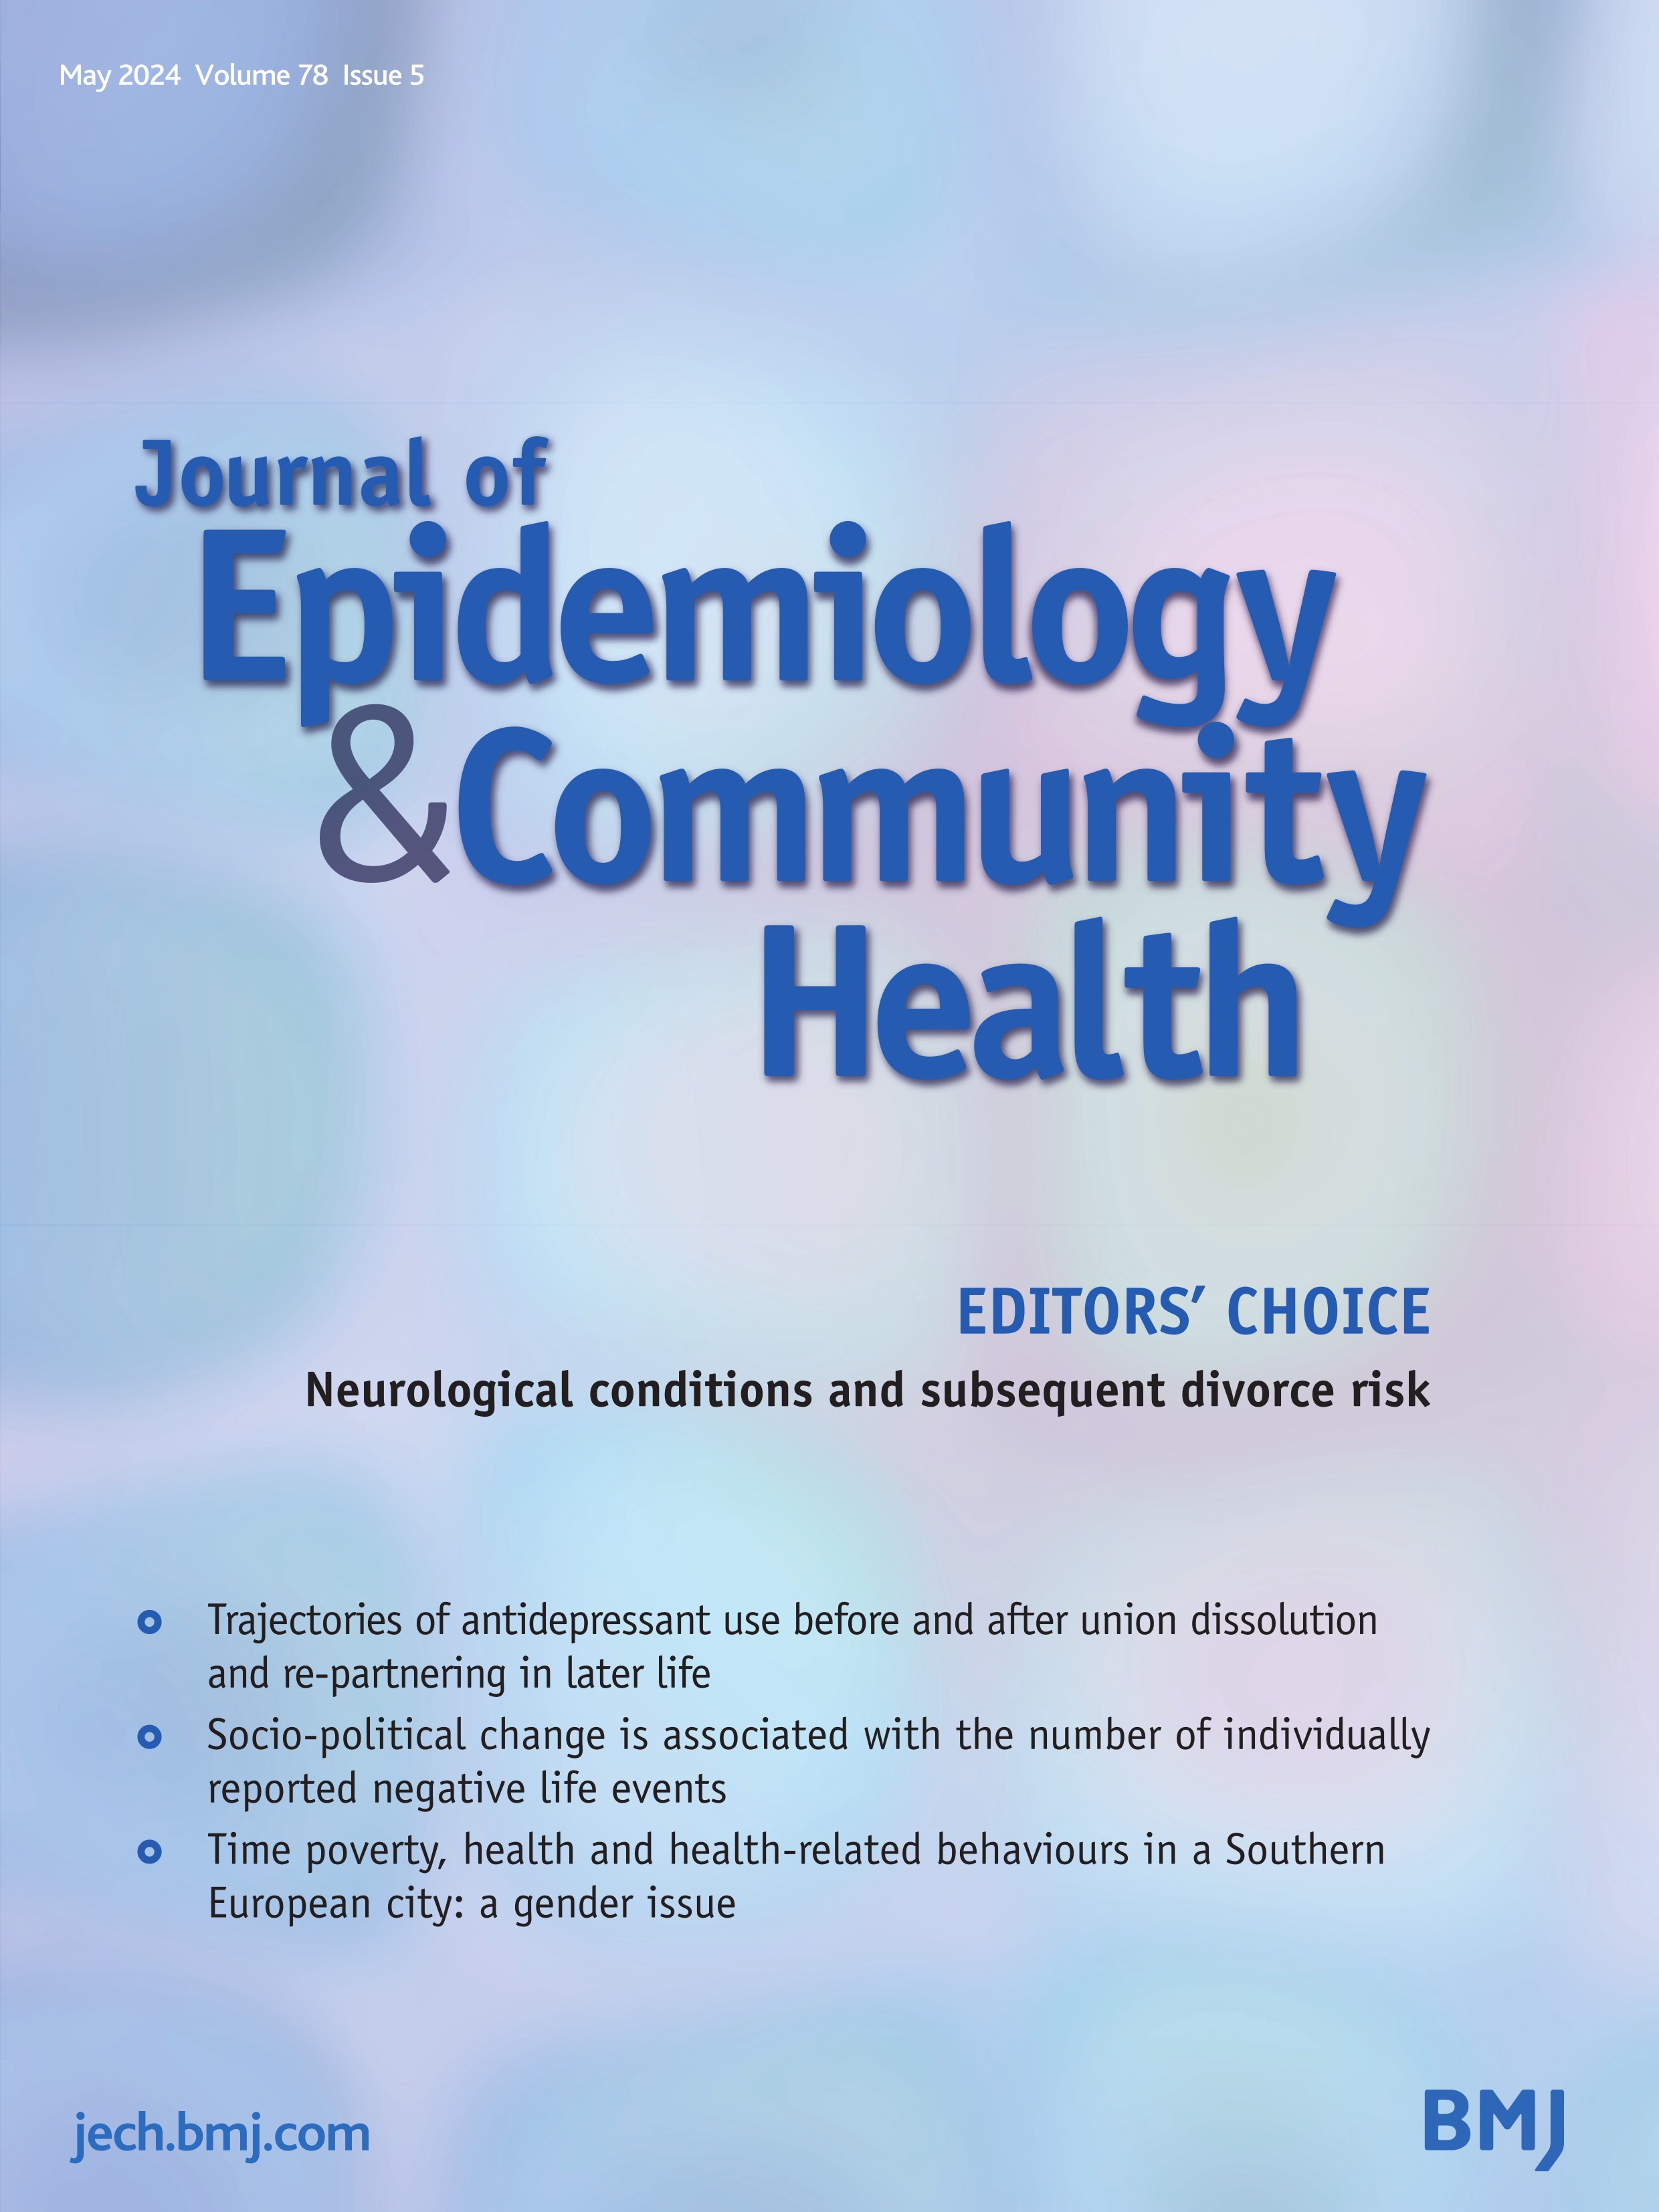 Time poverty, health and health-related behaviours in a Southern European city: a gender issue